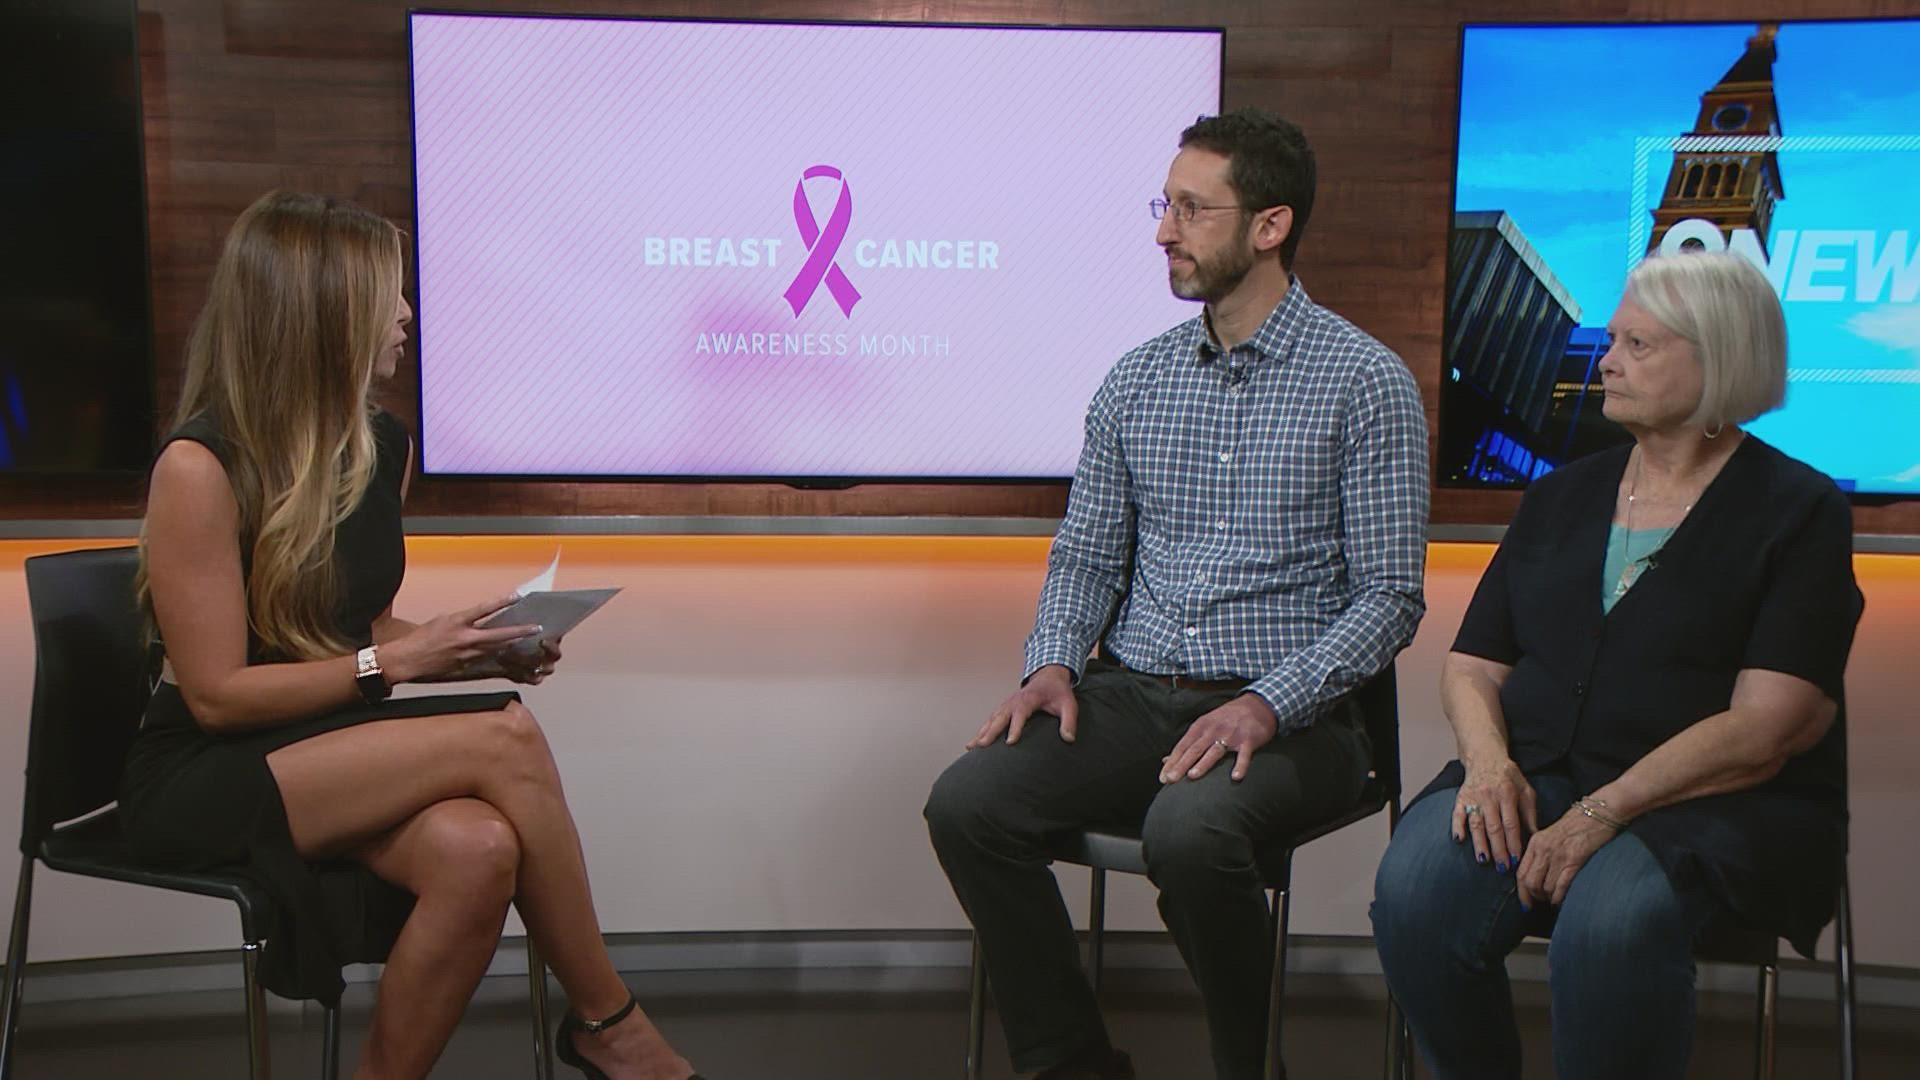 October is Breast Cancer Awareness Month. And here in Colorado, there are free support groups for people dealing with cancer and for their caregivers.